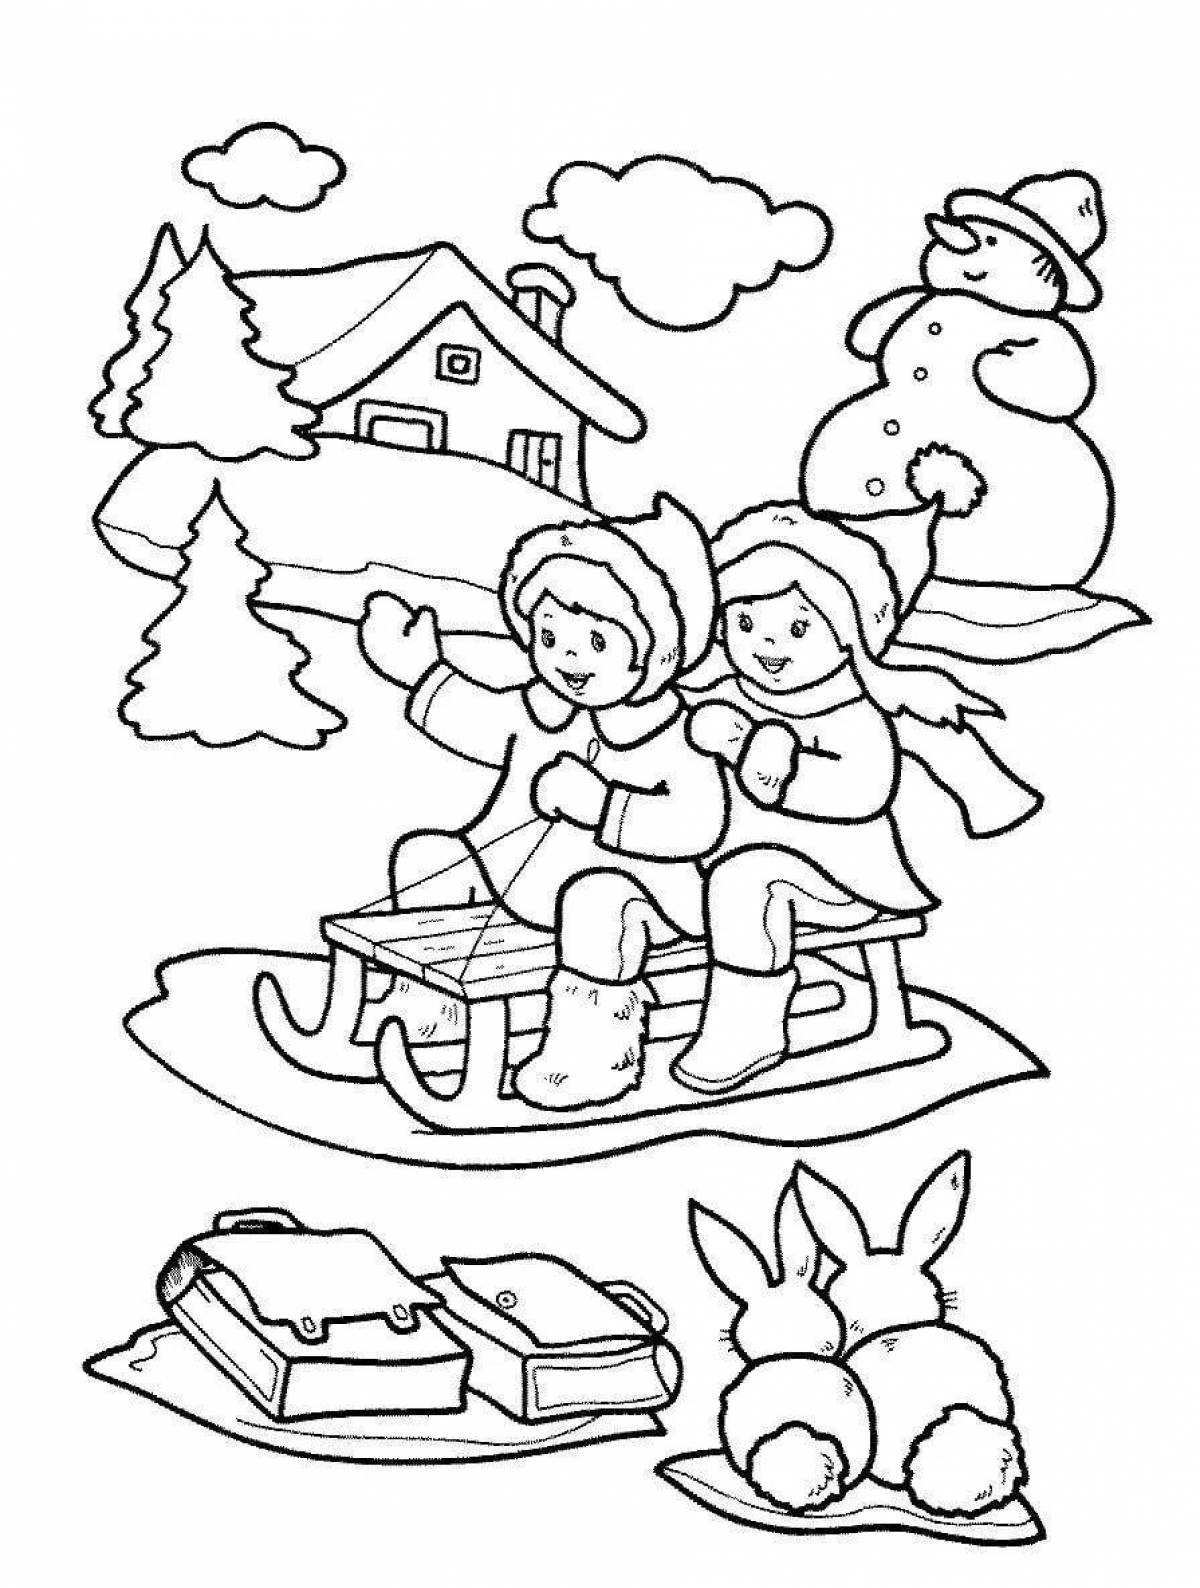 Exquisite winter day coloring book